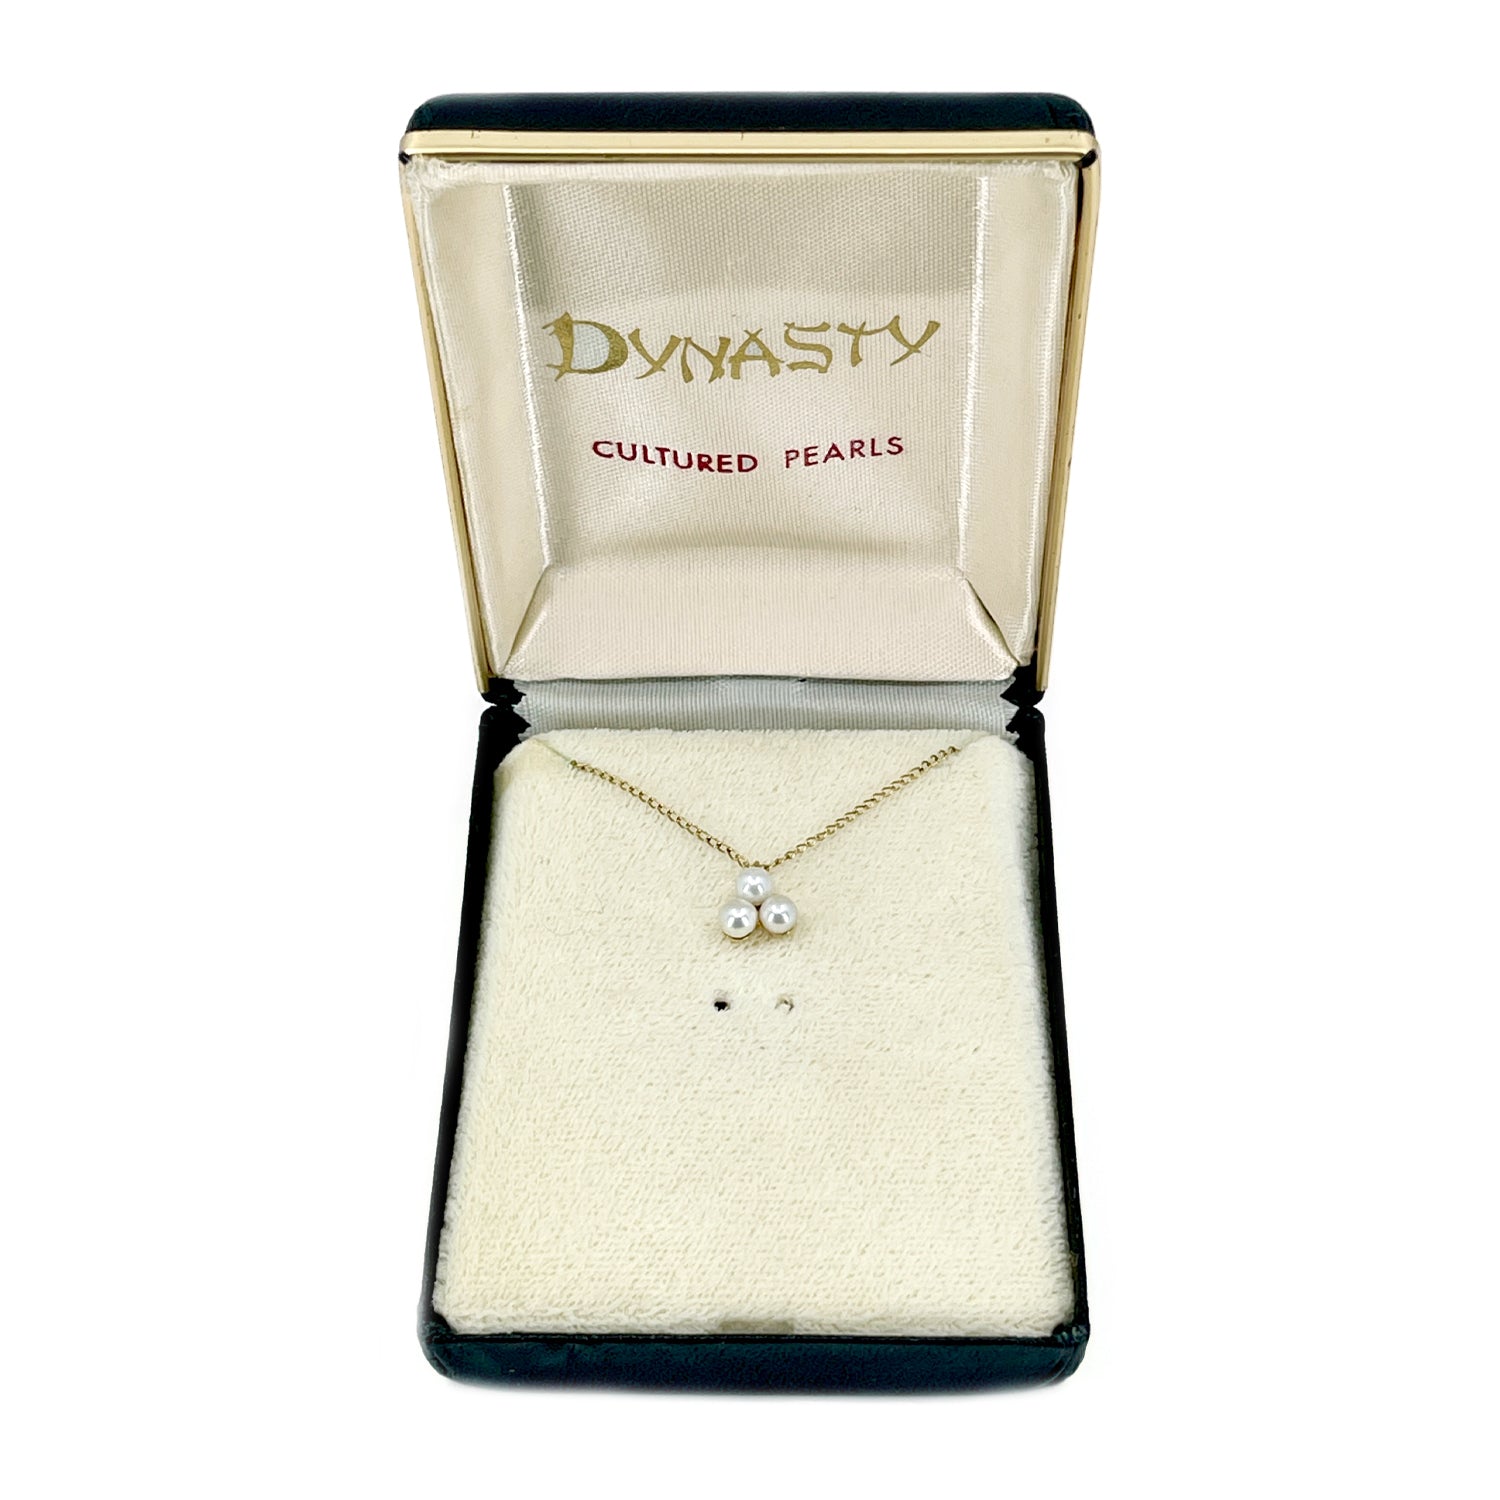 Dynasty Vintage Mid-Century Japanese Saltwater Akoya Pearl Necklace- Gold Filled 16 Inch